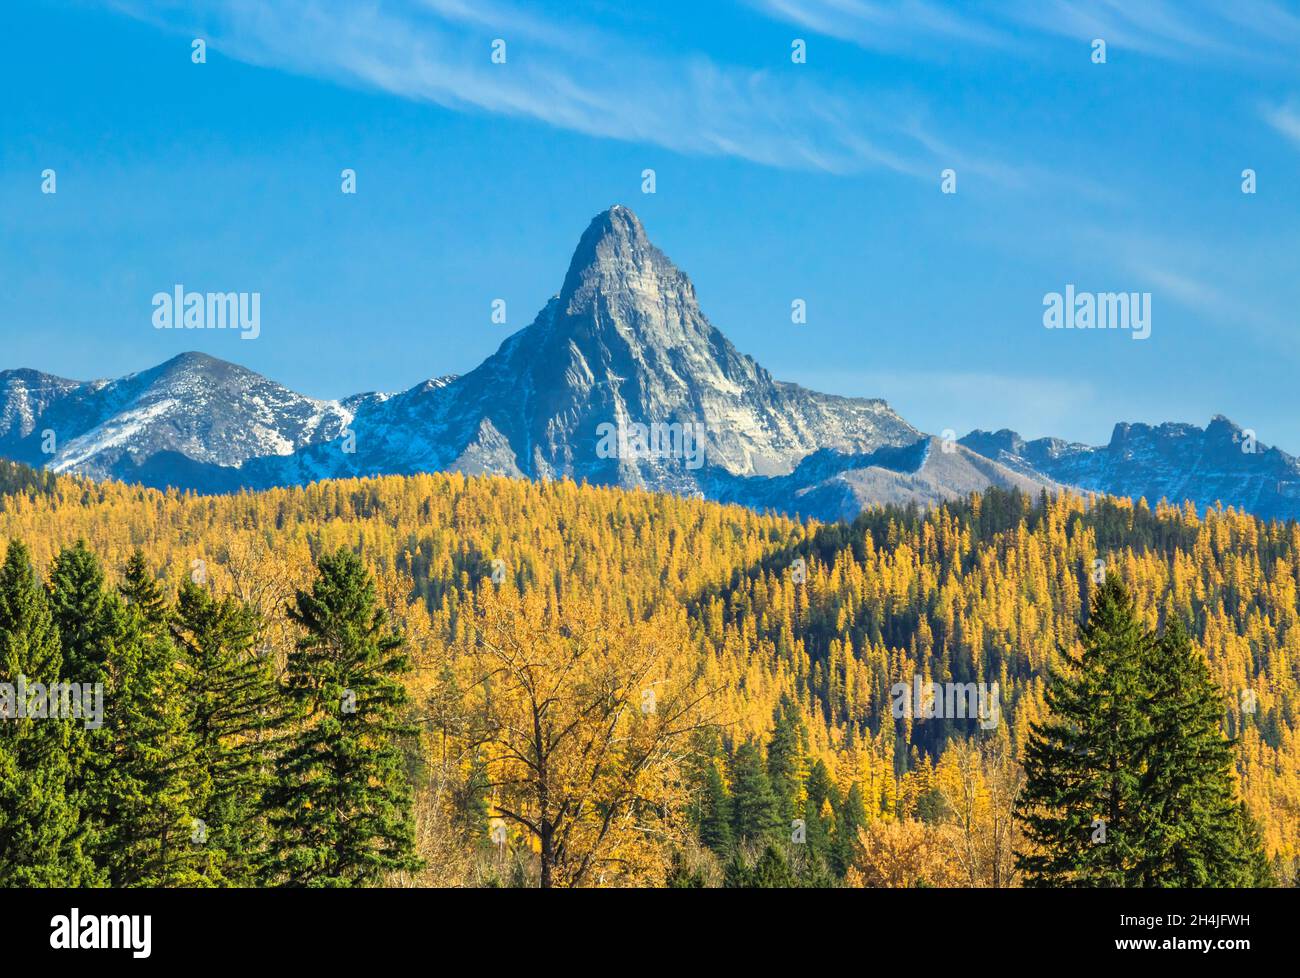 mount saint nicholas and foothills of autumn larch in glacier national park near essex, montana Stock Photo